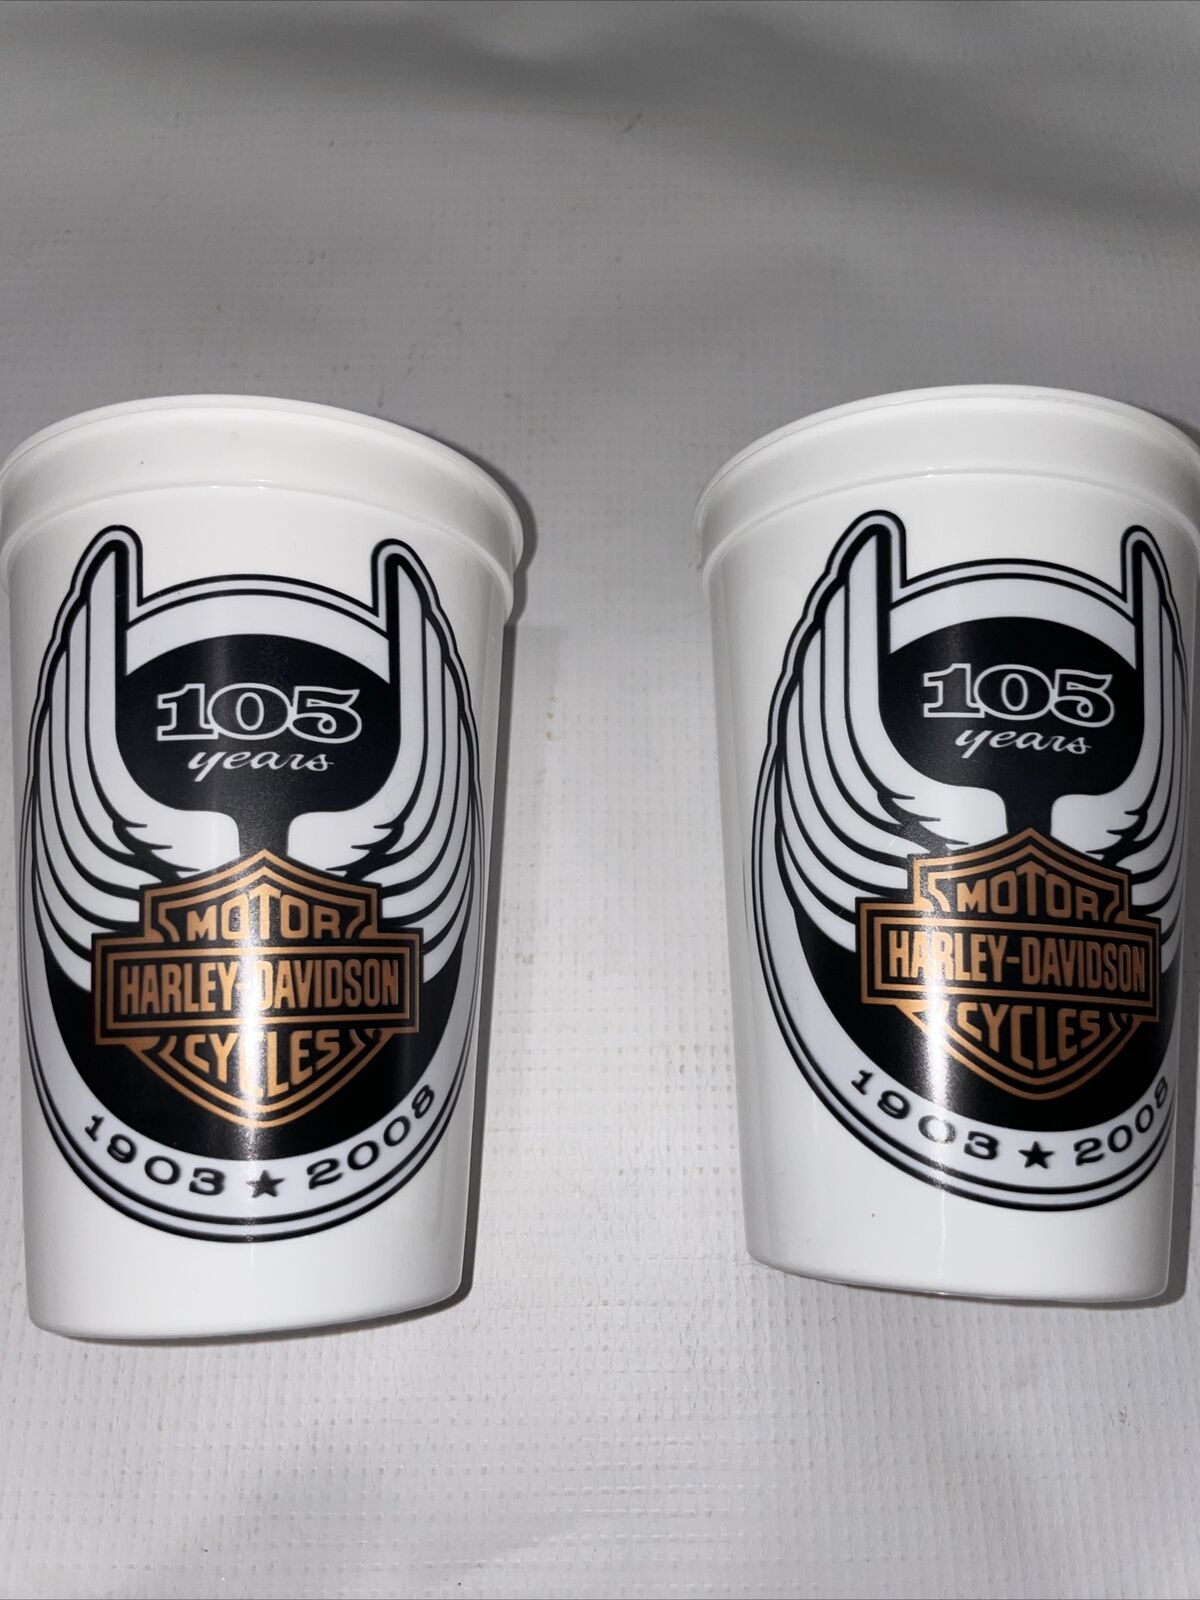 2 Harley Davidson 105 Years small cups never been used